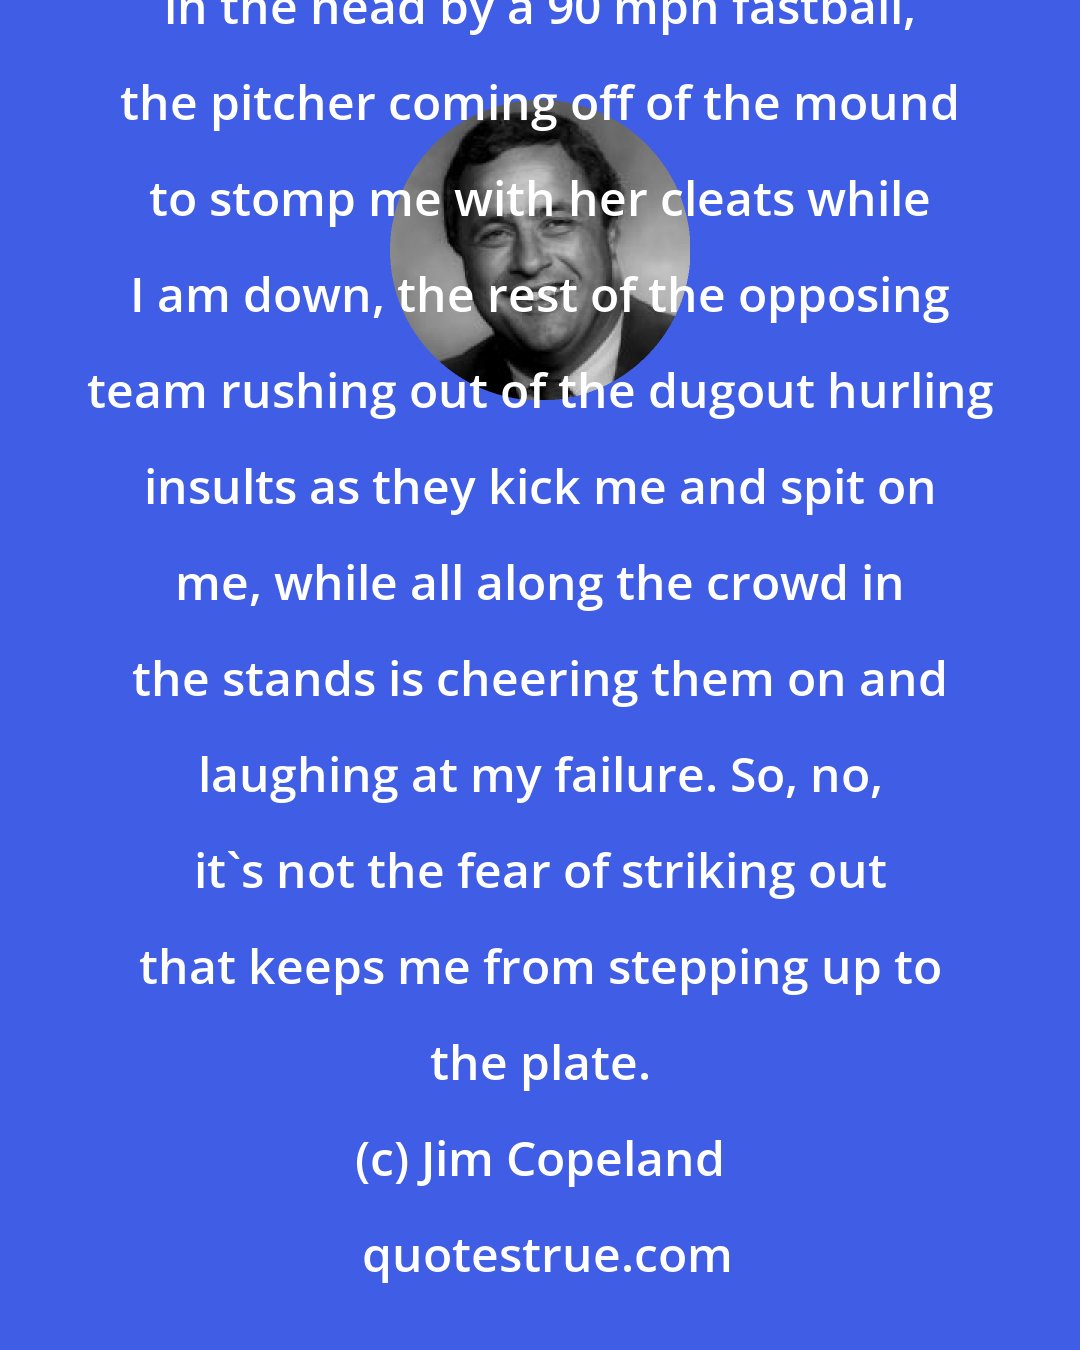 Jim Copeland: It's not fear of striking out that makes me reluctant to step up to the plate. It's the fear of getting hit in the head by a 90 mph fastball, the pitcher coming off of the mound to stomp me with her cleats while I am down, the rest of the opposing team rushing out of the dugout hurling insults as they kick me and spit on me, while all along the crowd in the stands is cheering them on and laughing at my failure. So, no, it's not the fear of striking out that keeps me from stepping up to the plate.